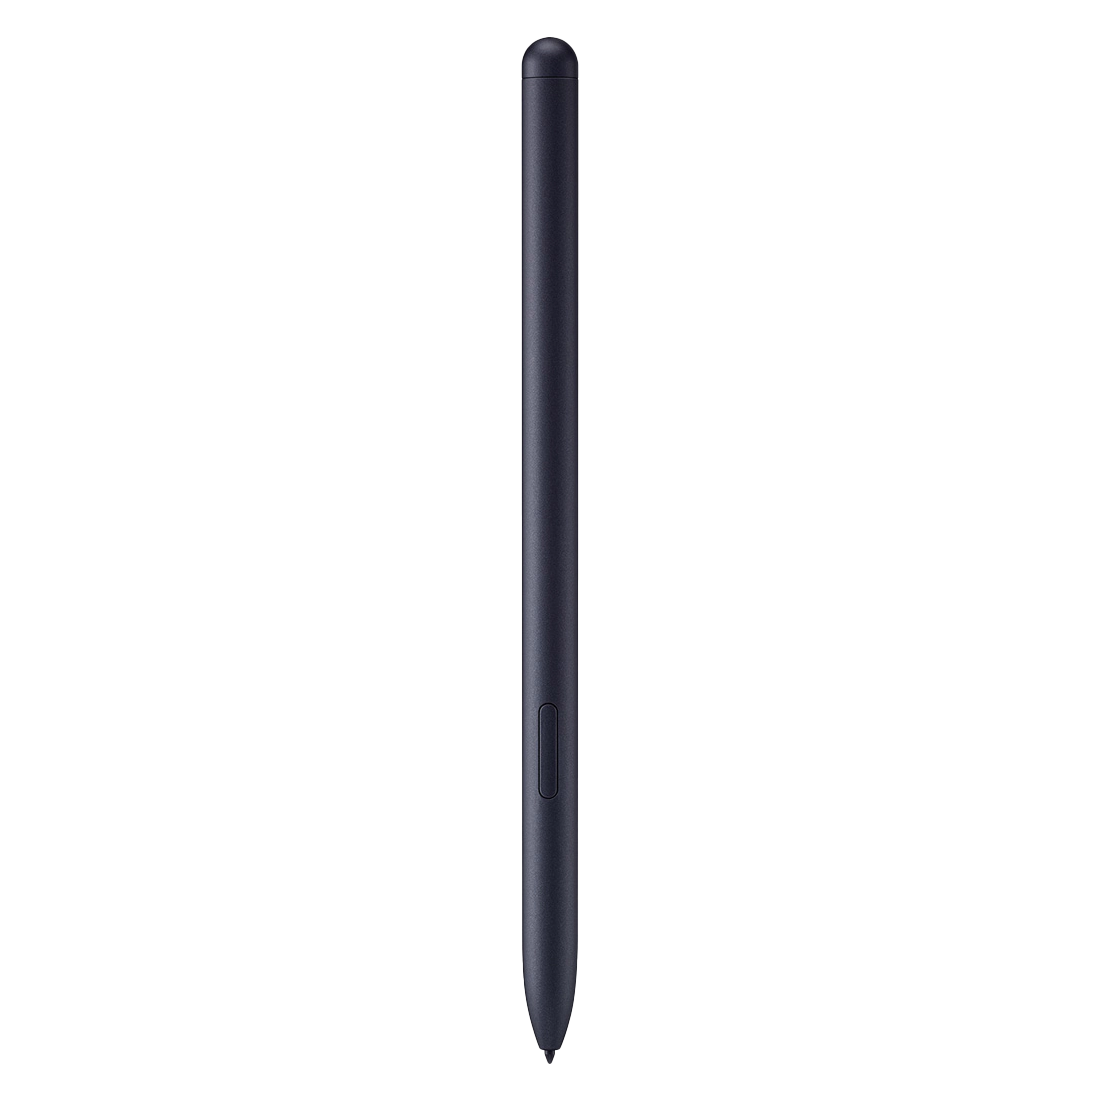 Samsung S Pen for Galaxy Tab S8 and Galaxy Book